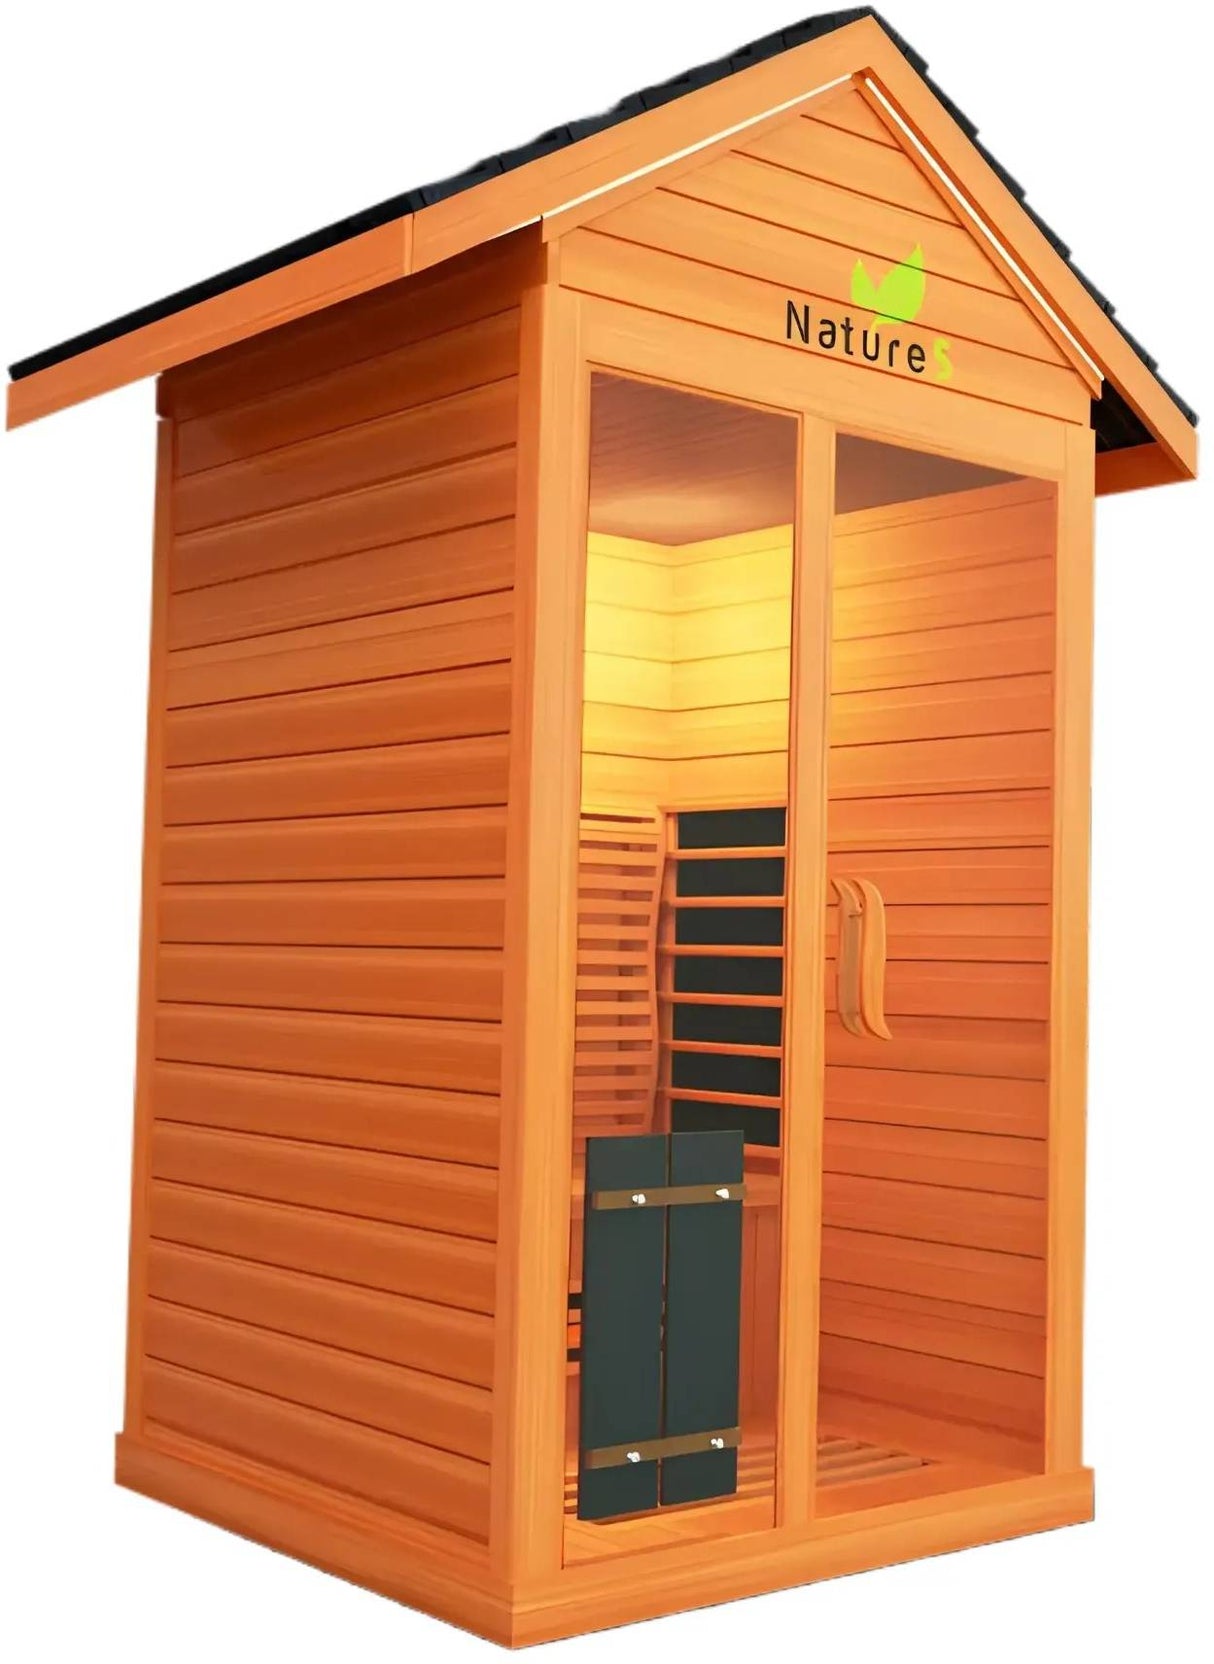 ZiahCare's Medical Saunas 2 Person Outdoor Full Spectrum Infrared Sauna Nature 5 Mockup Image 2